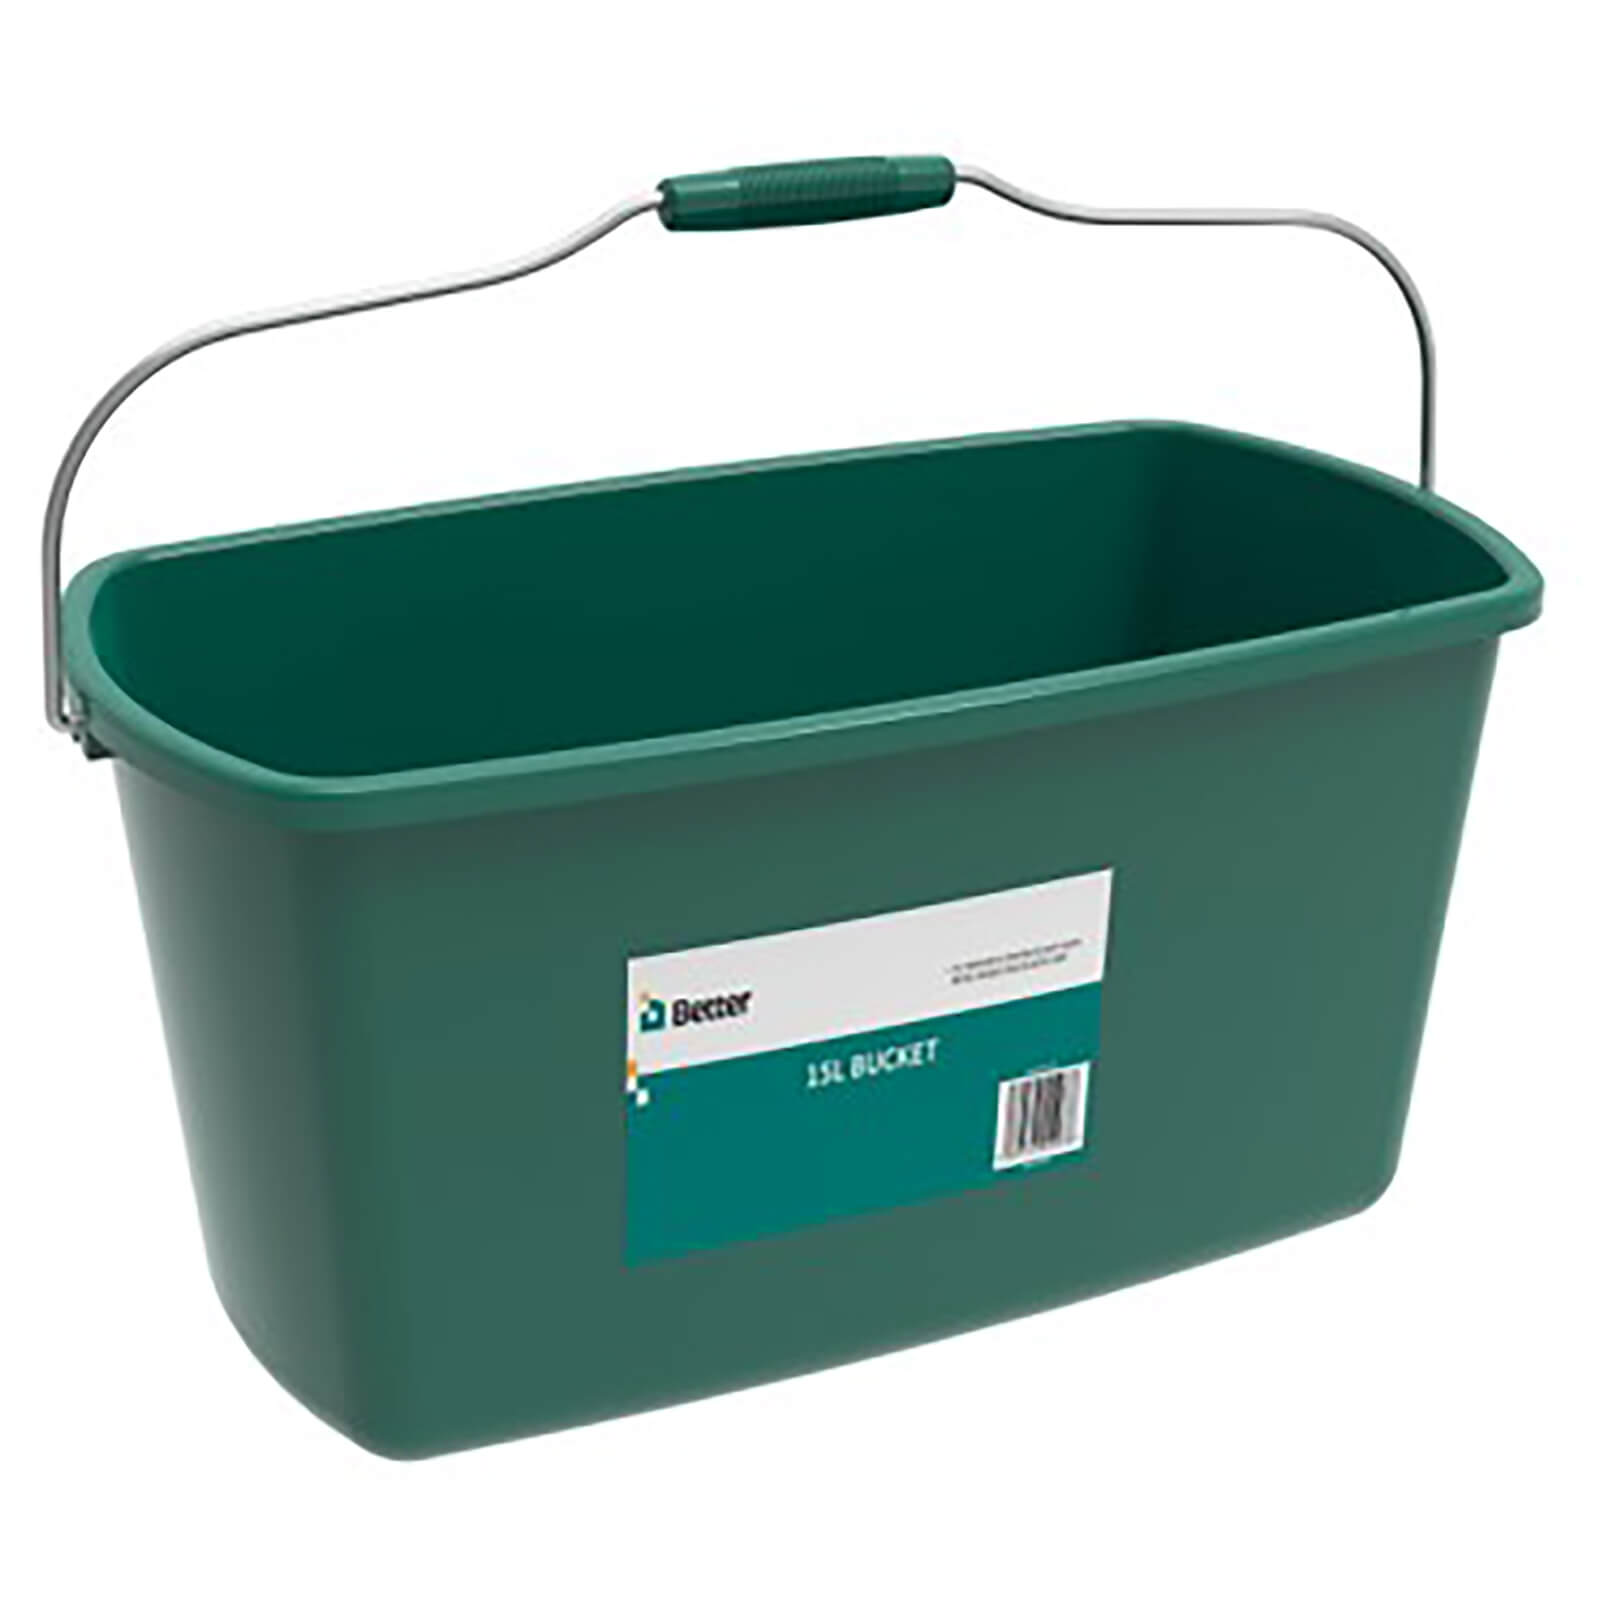 Photo of Better 15l Window Cleaning Bucket